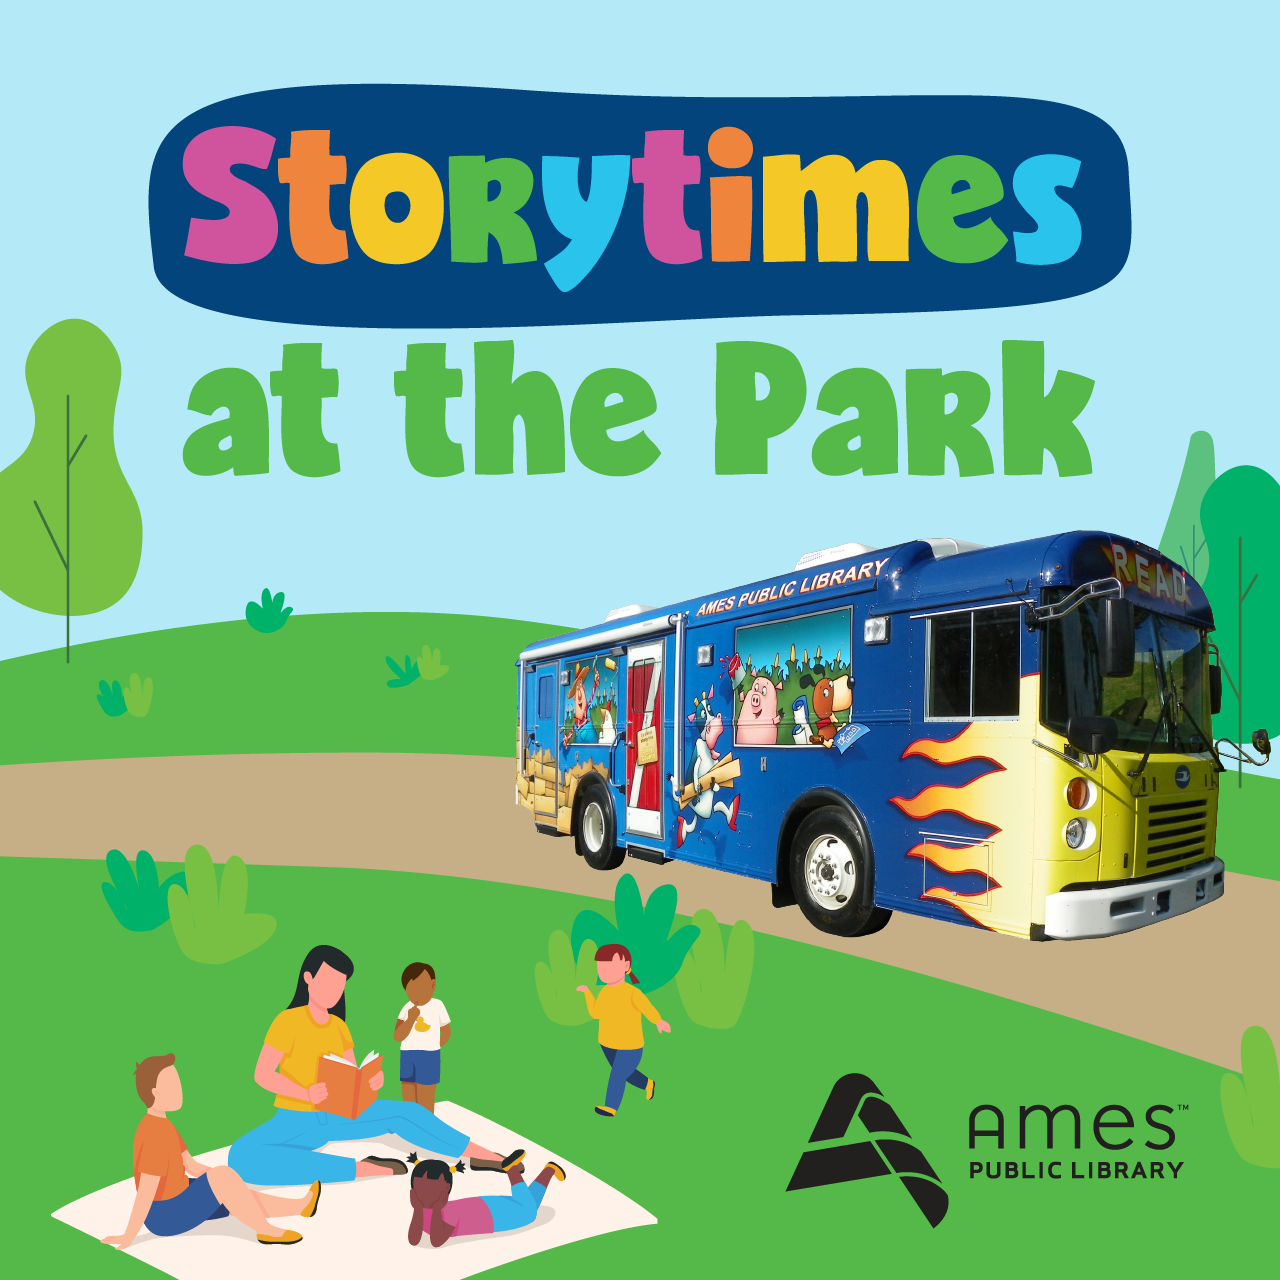 Storytimes at the Park